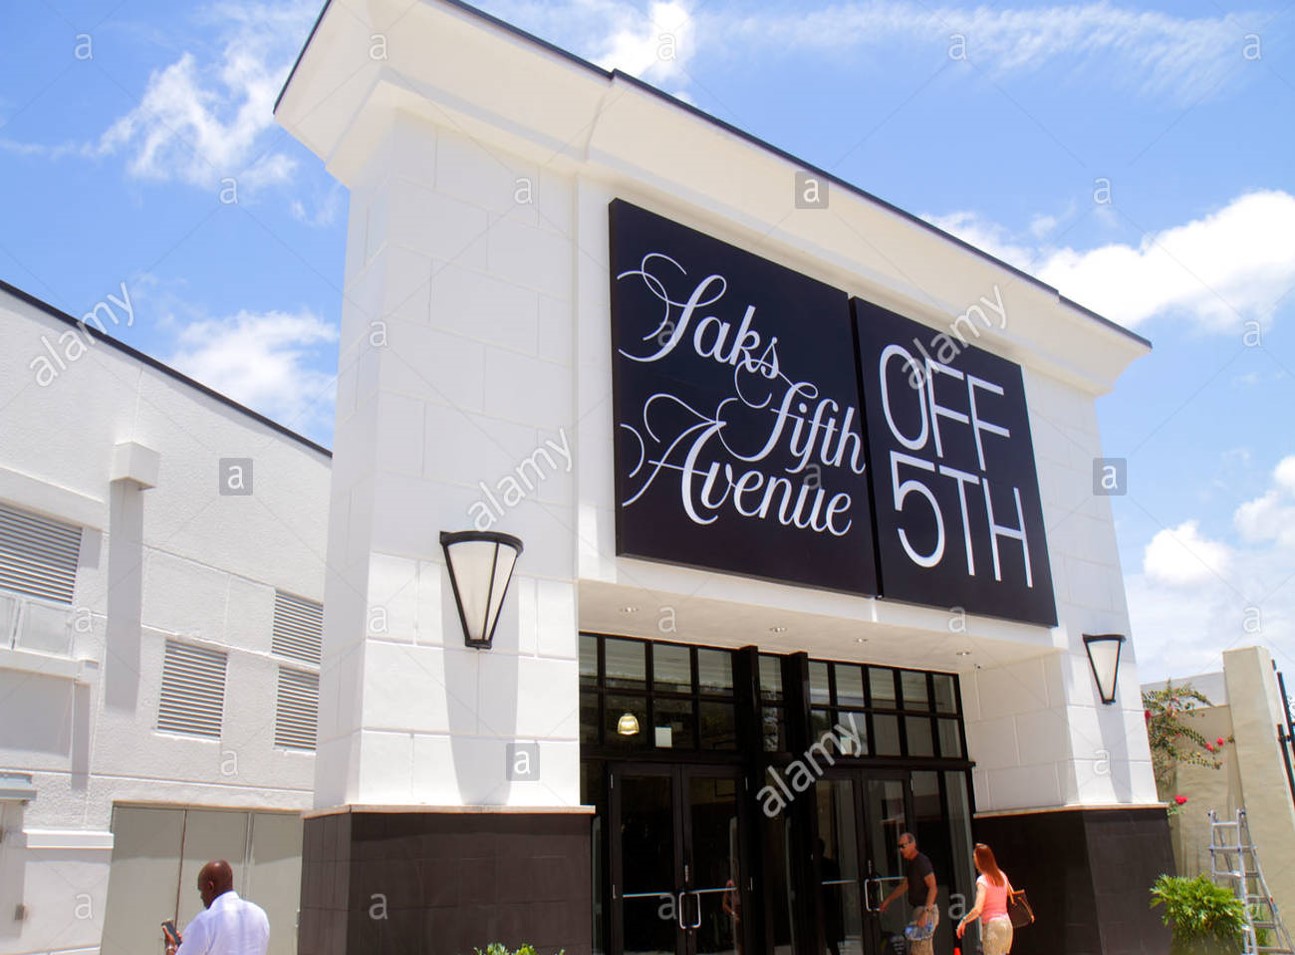 Saks Fifth Avenue store in WestShore Plaza to close in May